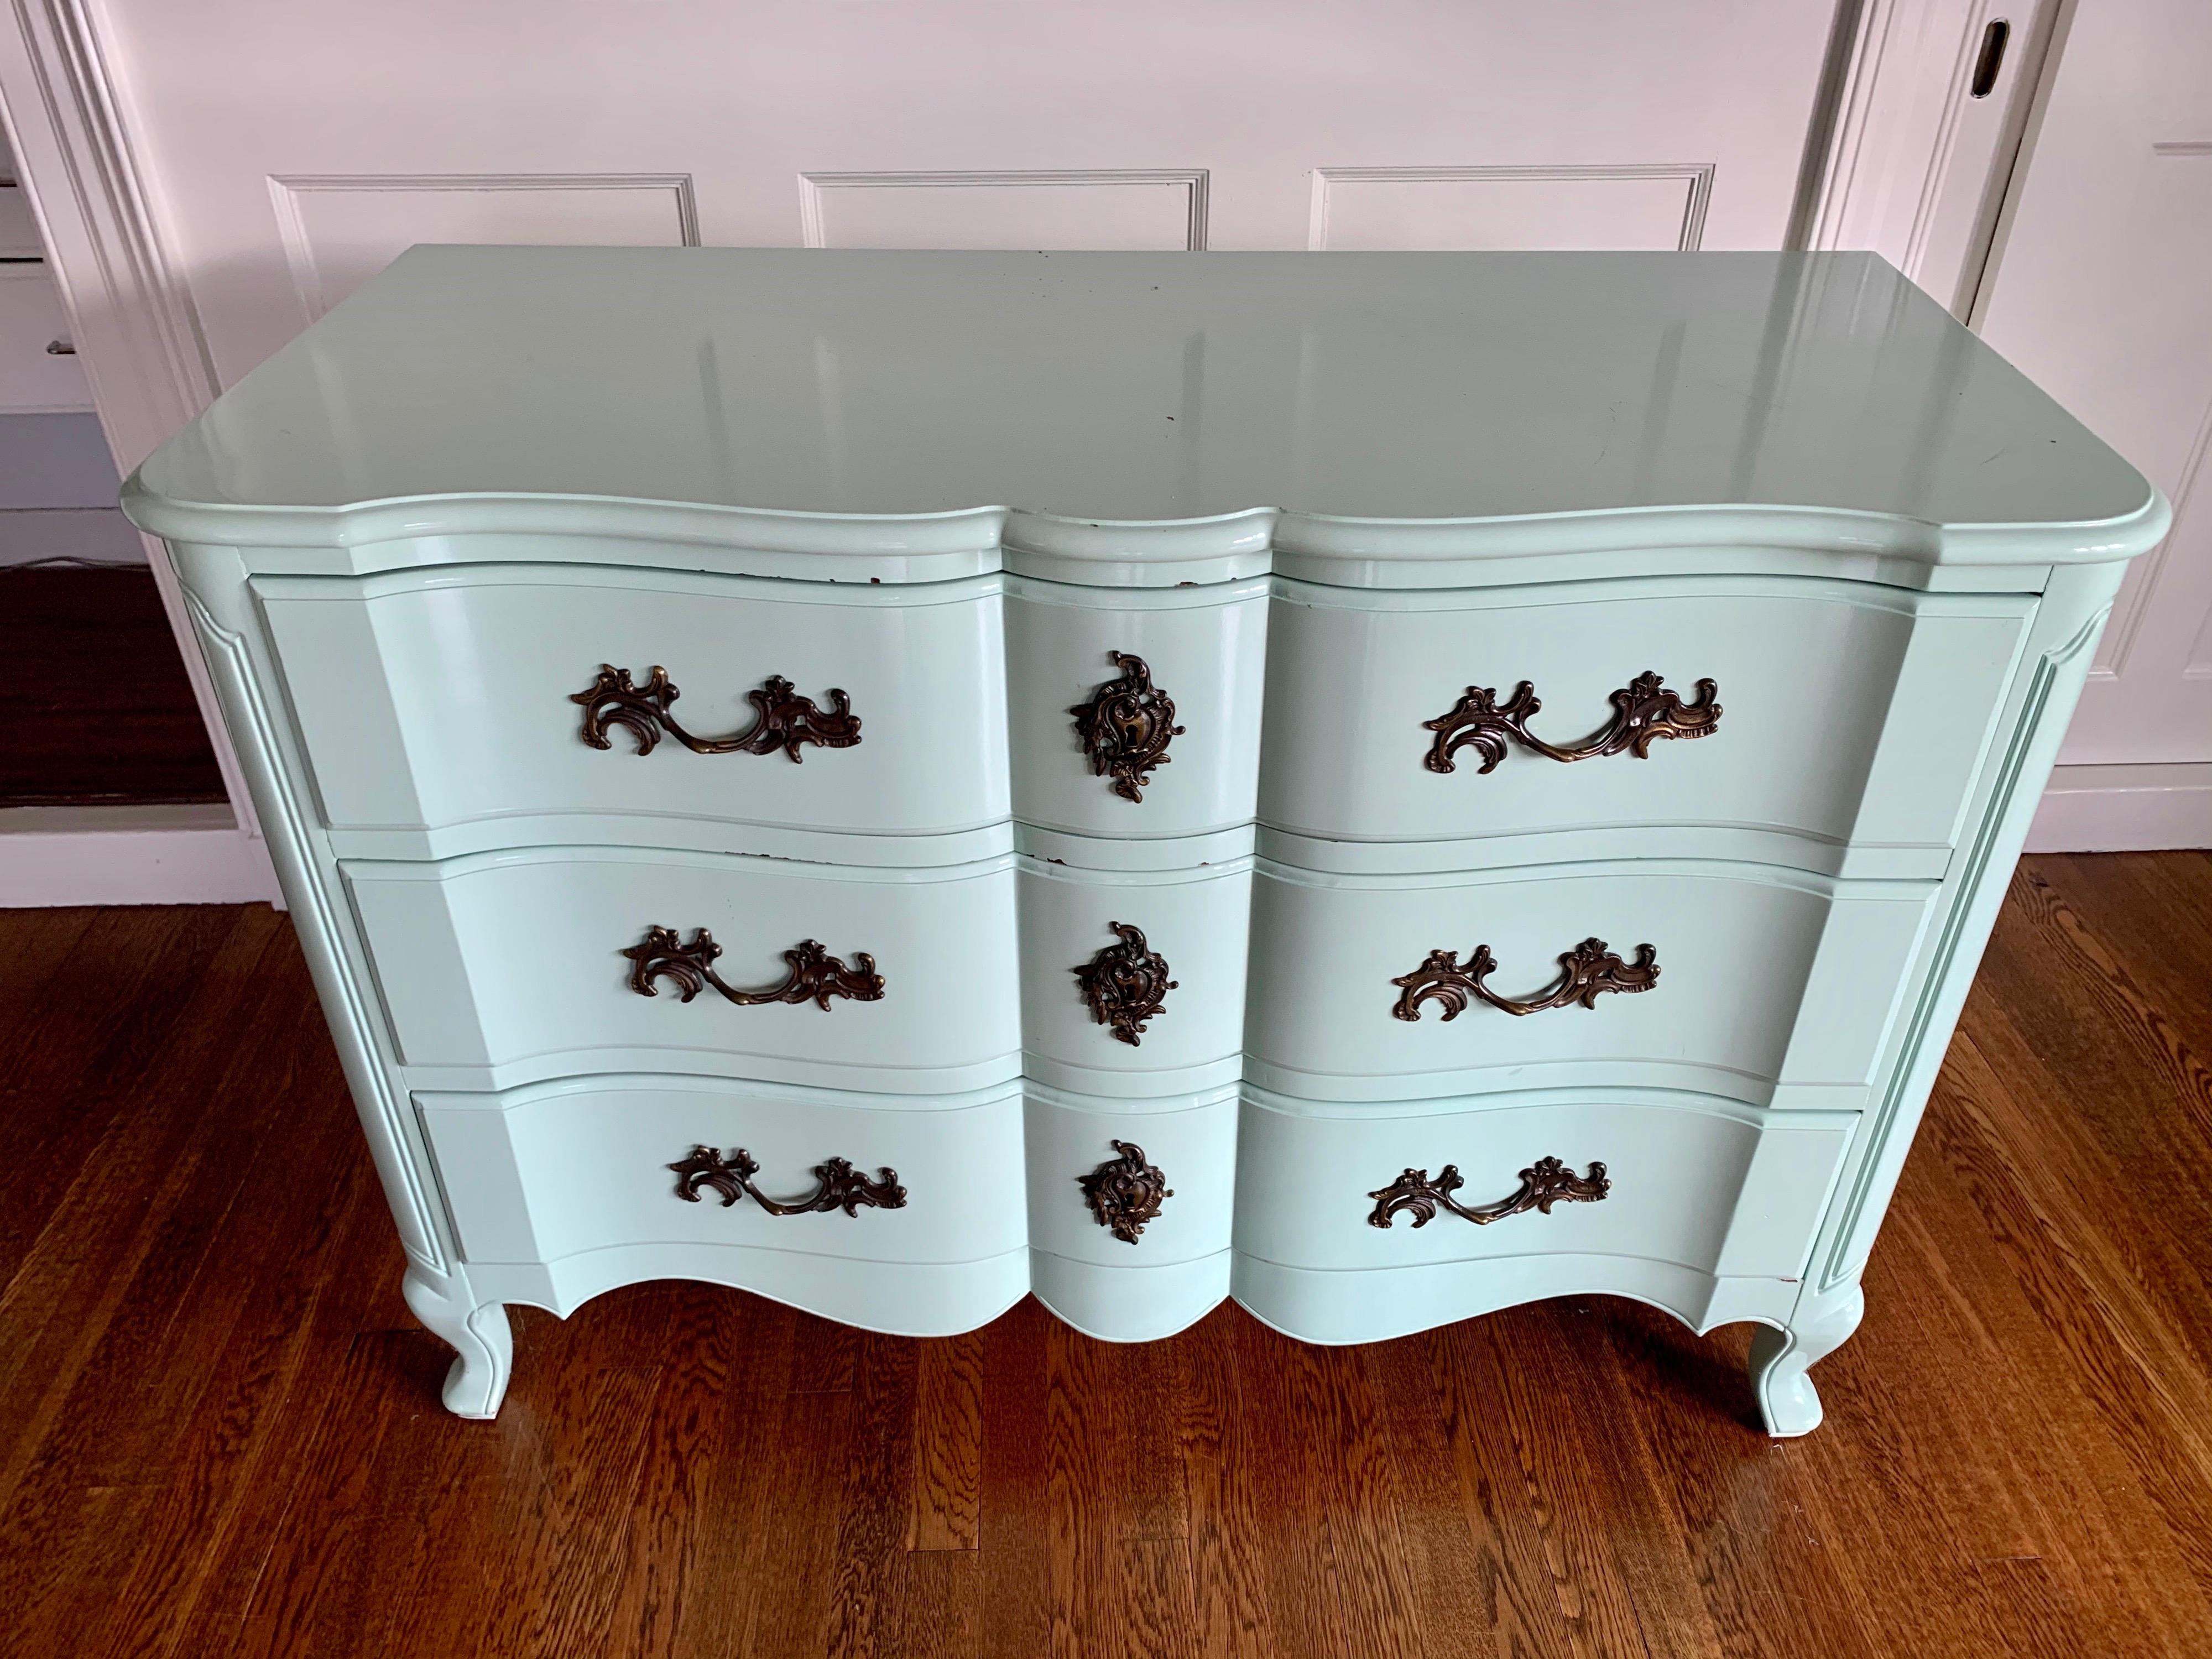 Magnificent French Provincial three-drawer lacquered chest of drawers, all original save for the stunning
robins egg blue lacquer. A special piece for your home. Now, more than ever, home is where the heart is.